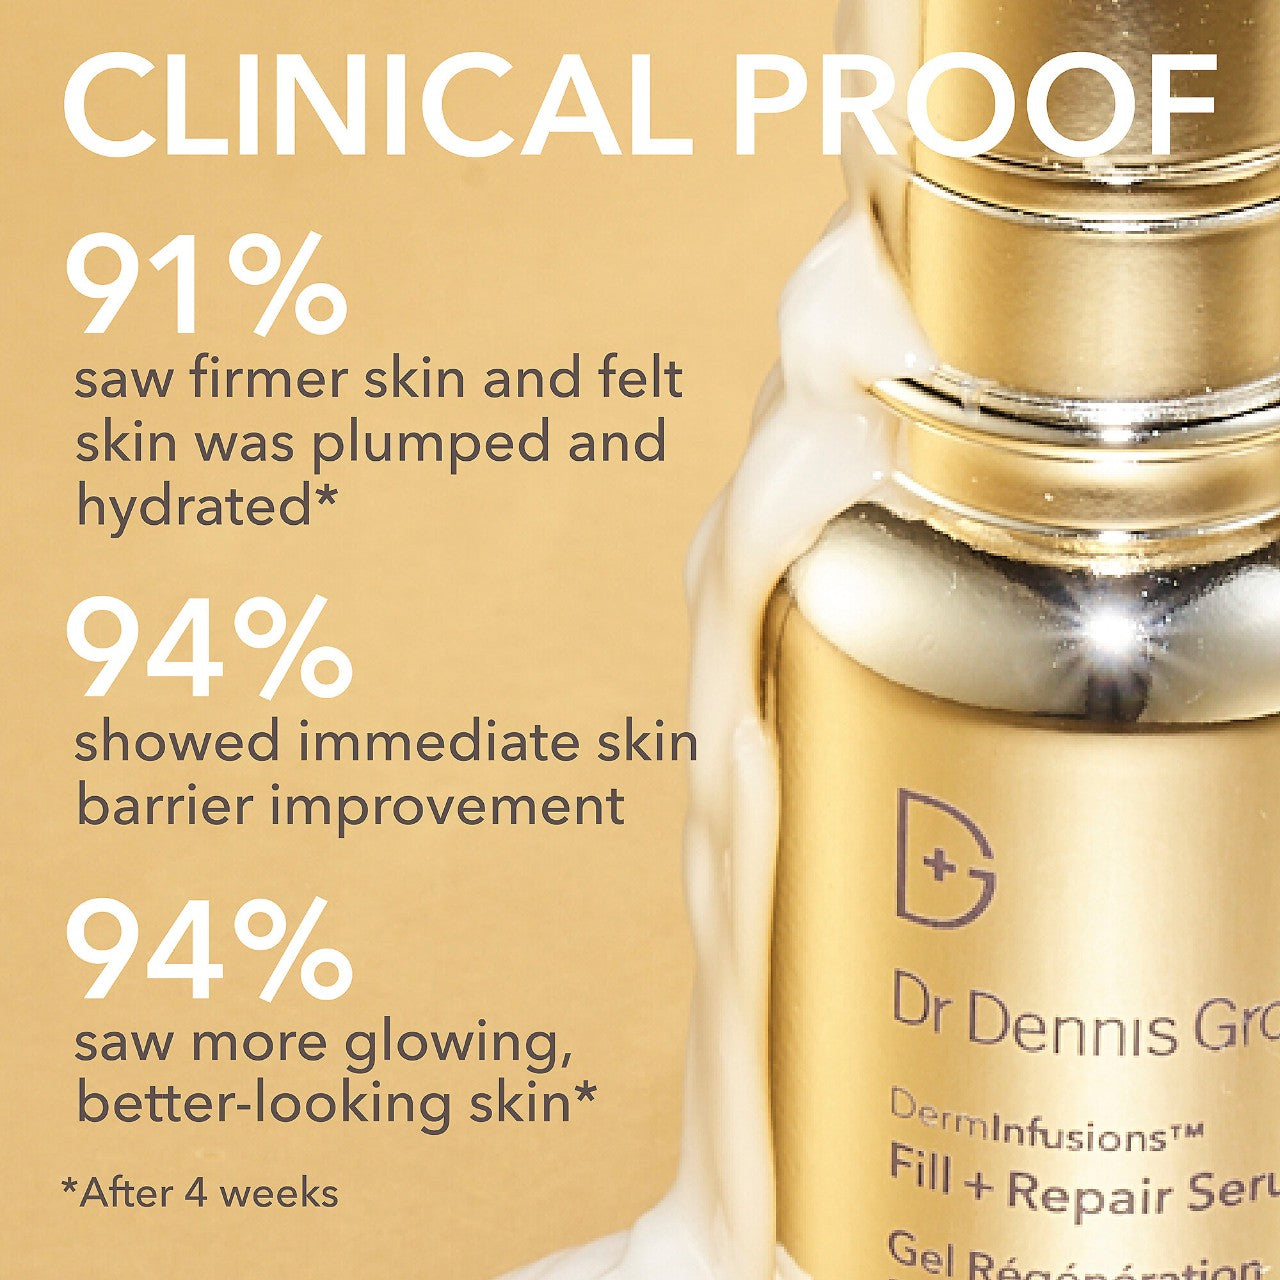 Dr. Dennis Gross Skincare, DermInfusions Fill + Repair Serum with Hyaluronic Acid